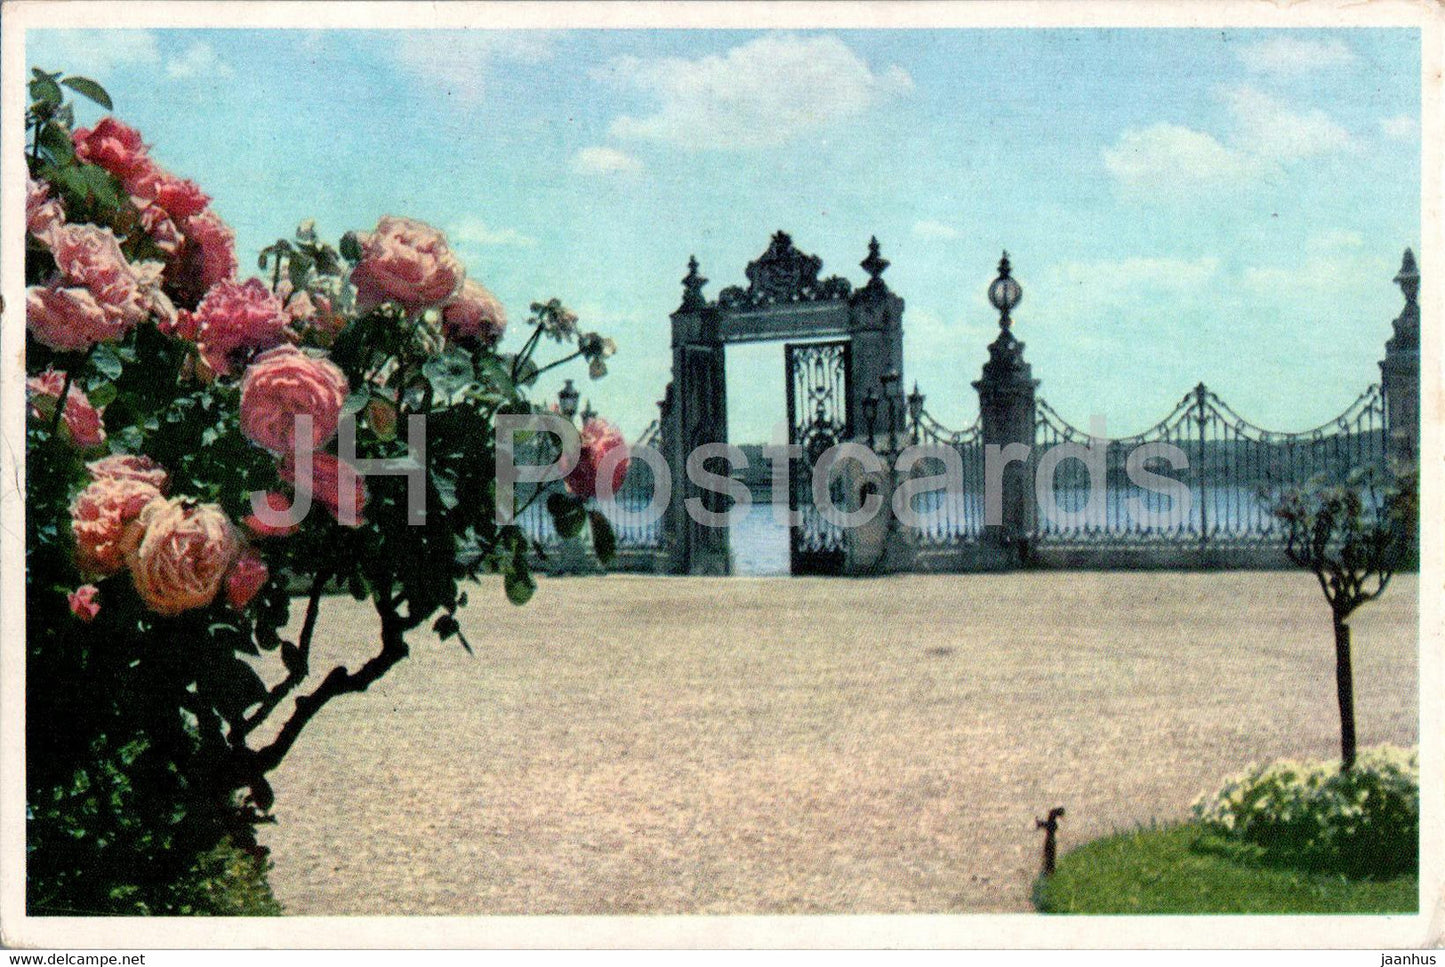 Istanbul - Garden of the Dolmabahce Palace - old postcard - Turkey - unused - JH Postcards